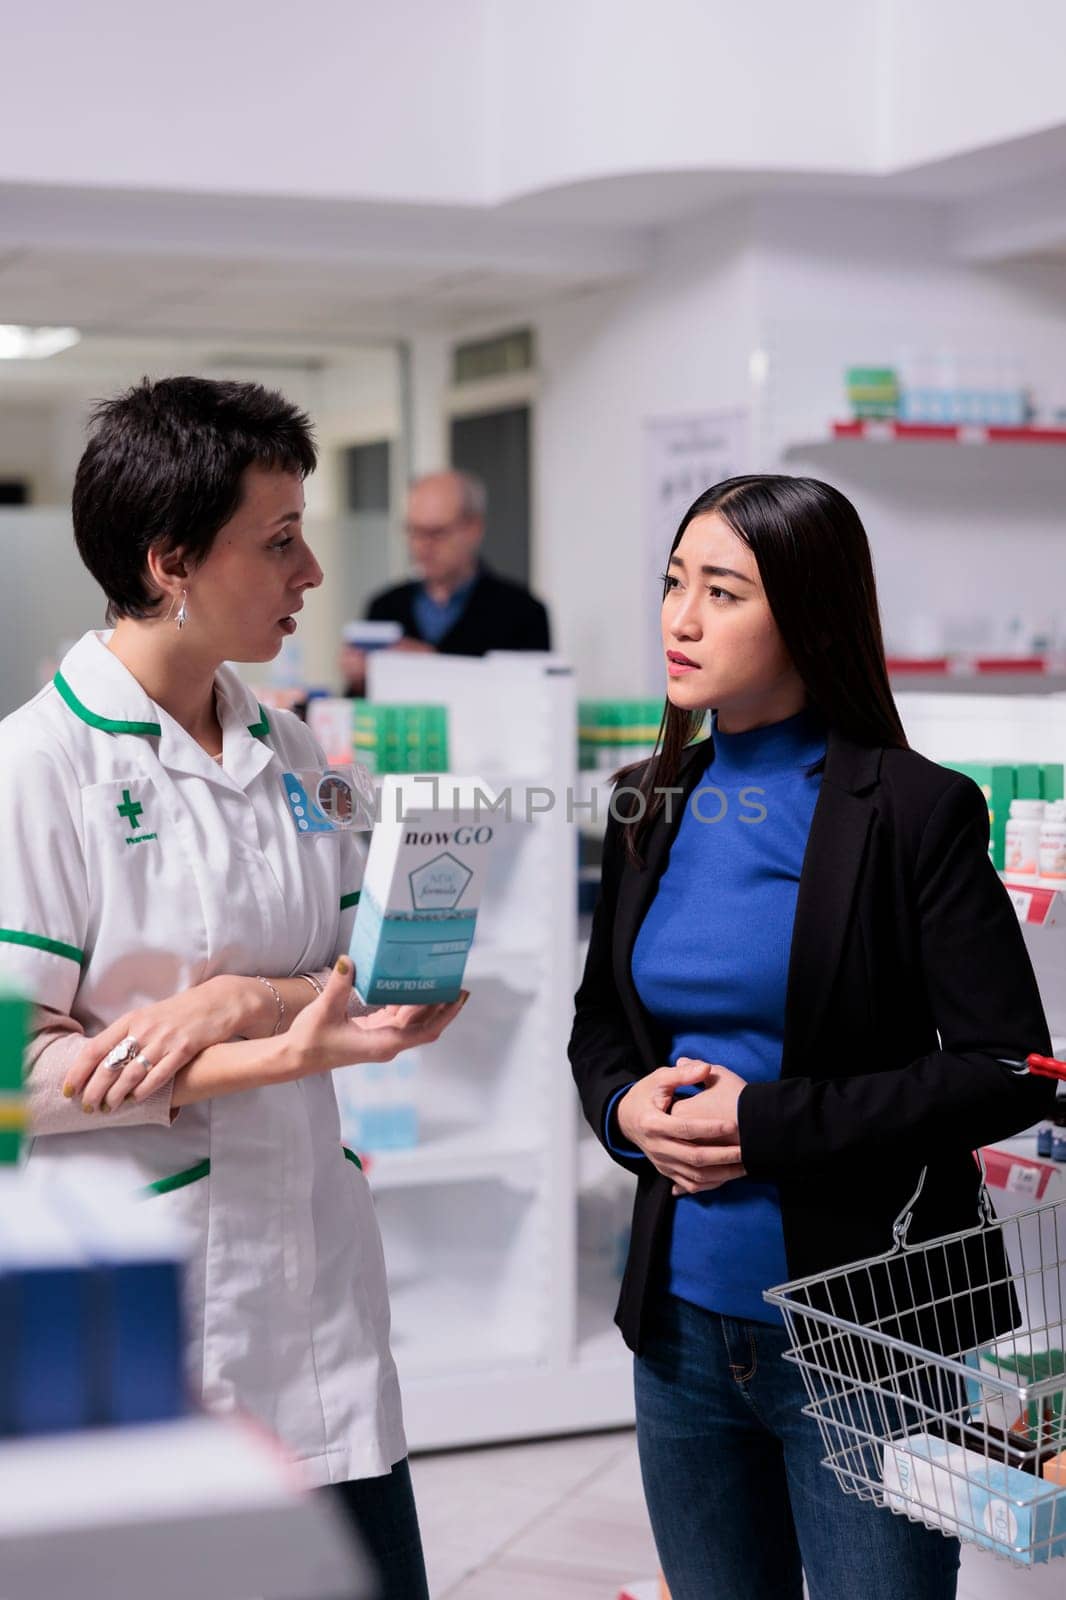 Drugstore worker giving customer assistance in choosing food poisoning remedy. Young asian woman holding hand on stomach and explaining abdominal pain symptom to pharmacy employee